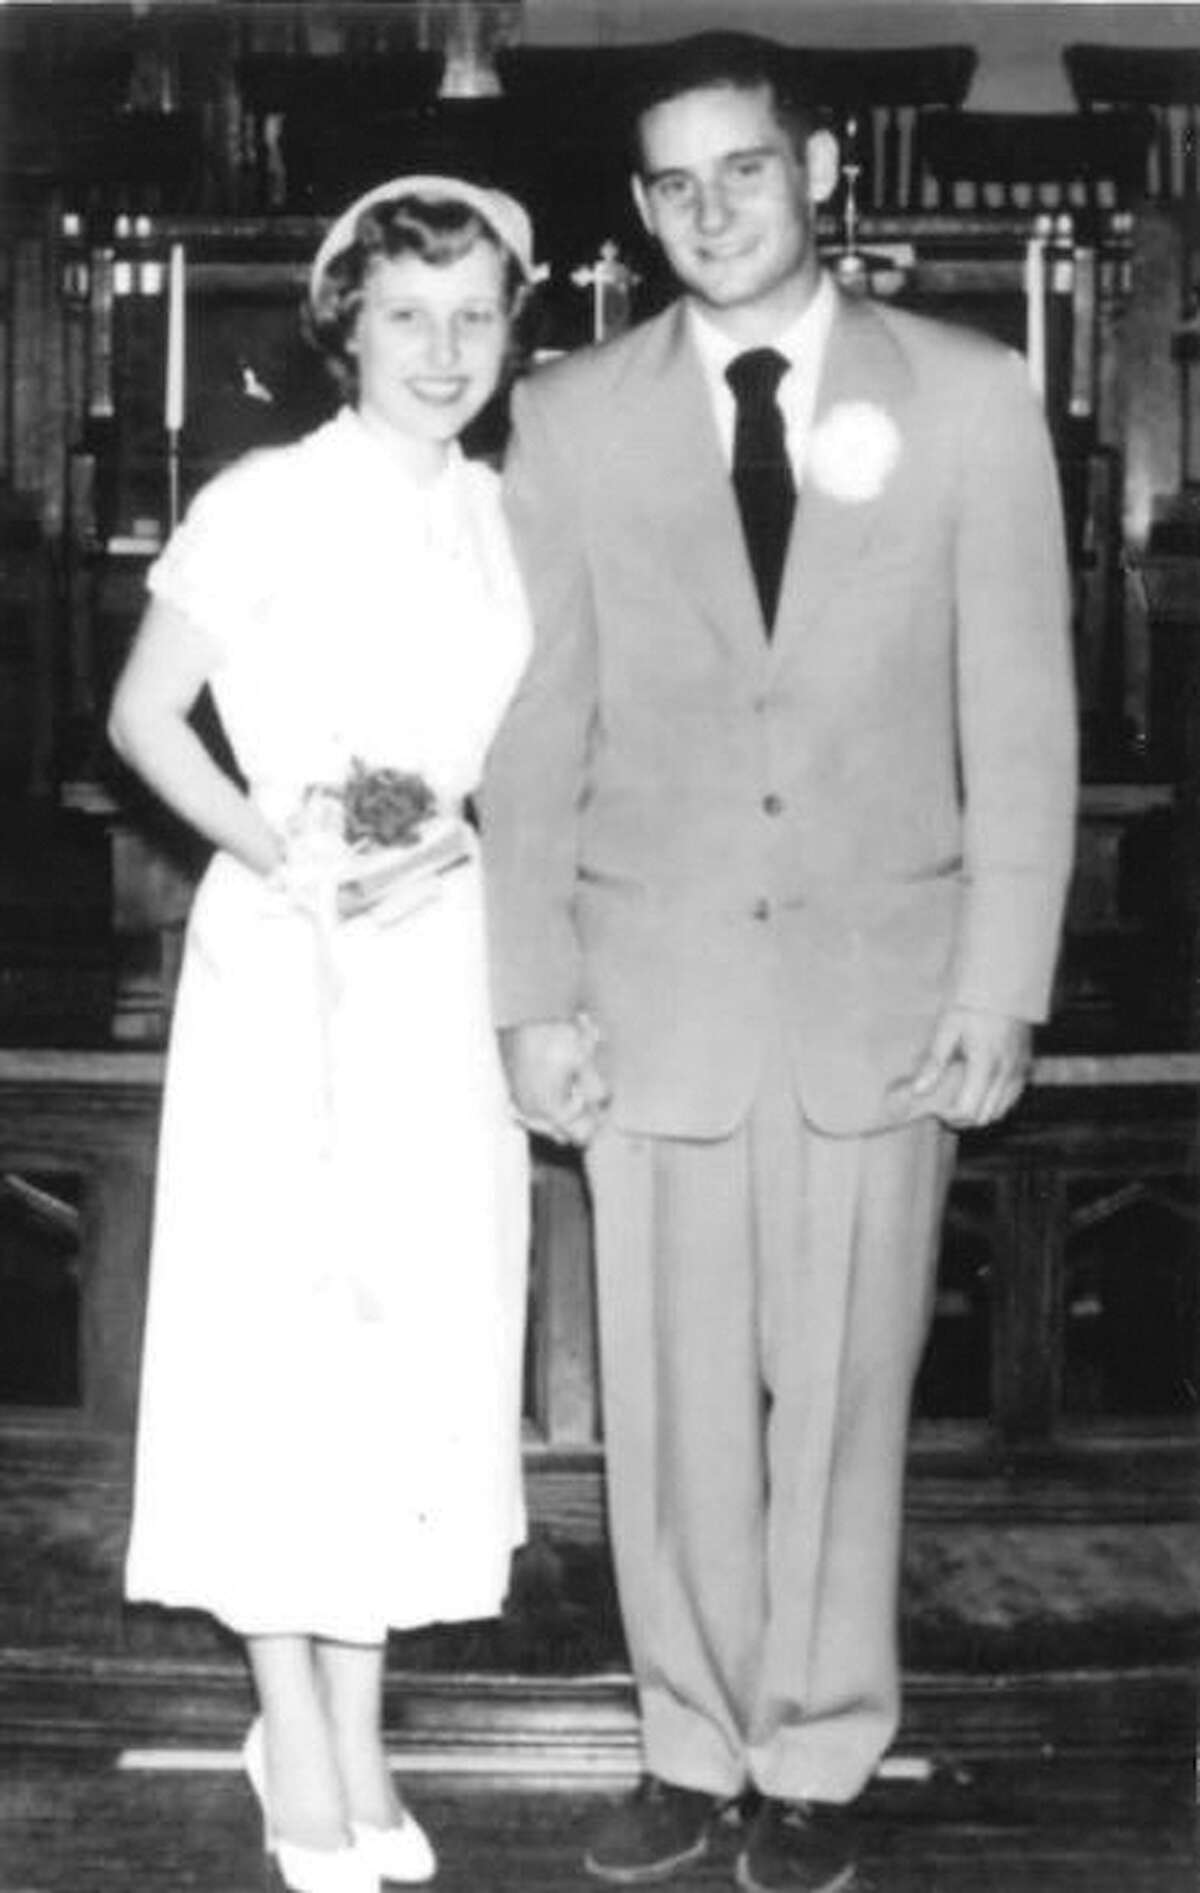 Pictured is Norma and Loren Klaus at their wedding on Aug. 17, 1952.